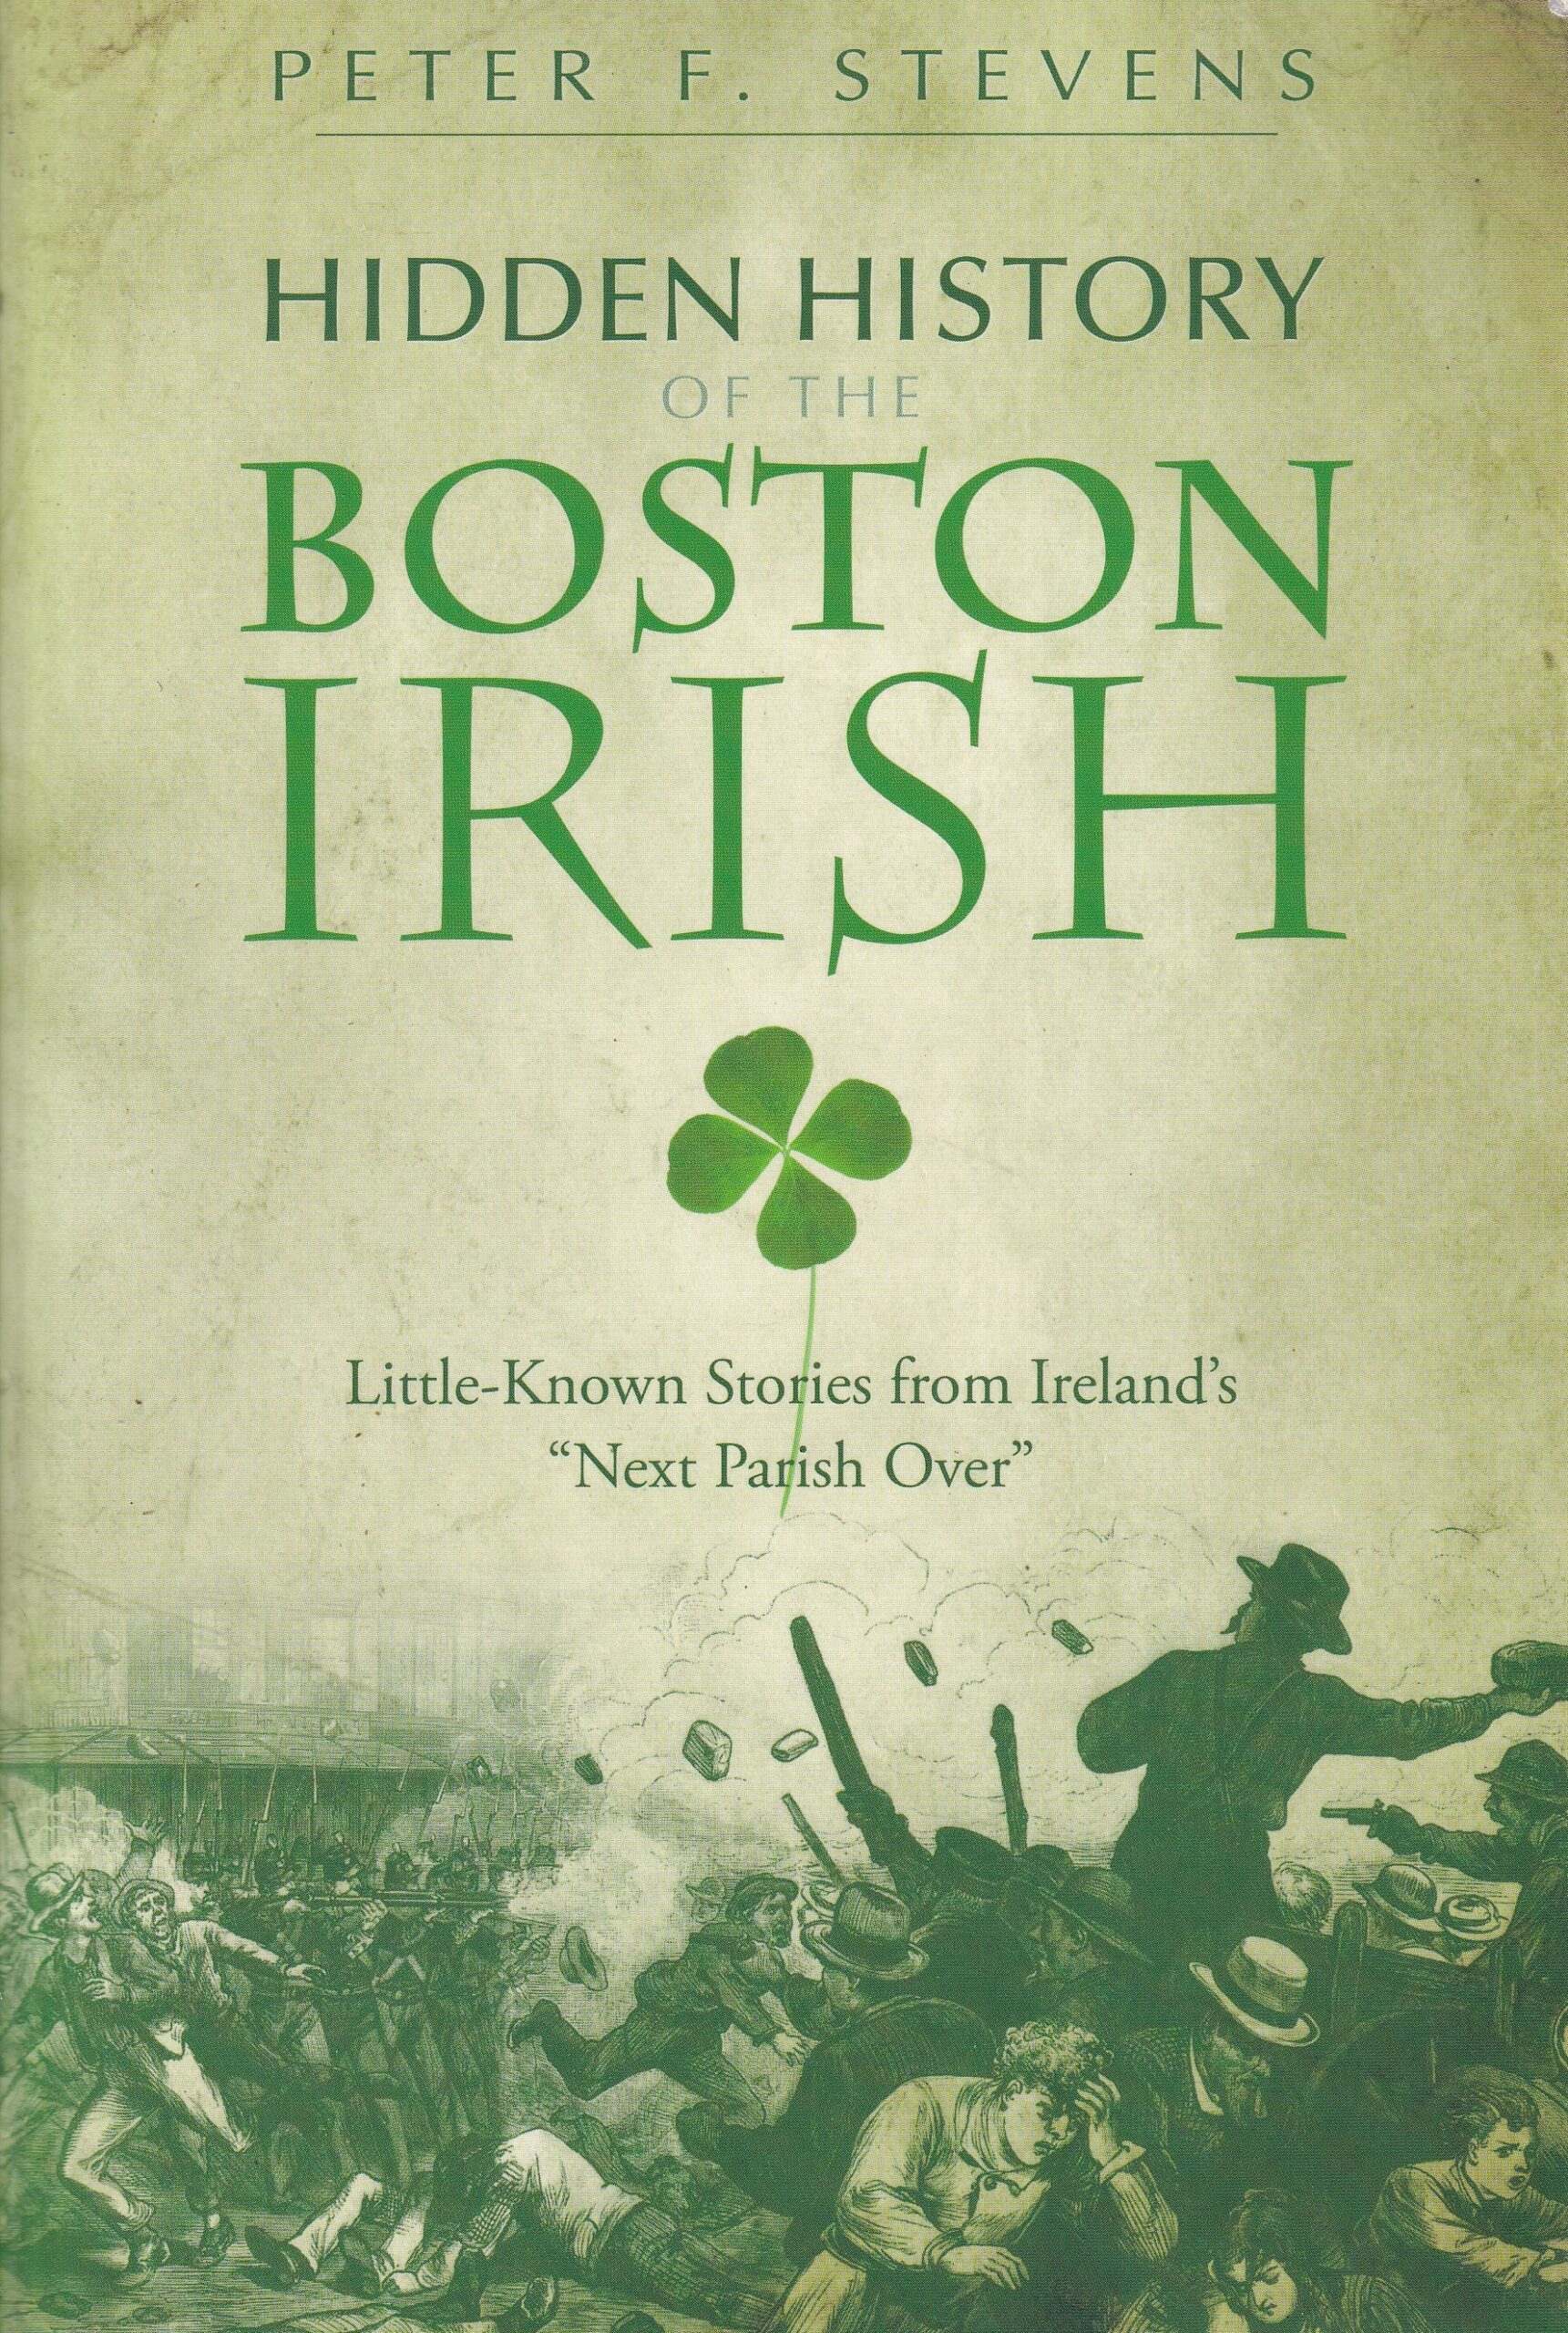 Hidden History of the Boston Irish: Little-Known Stories from Ireland’s “Next Parish Over” | Peter F. Stevens | Charlie Byrne's